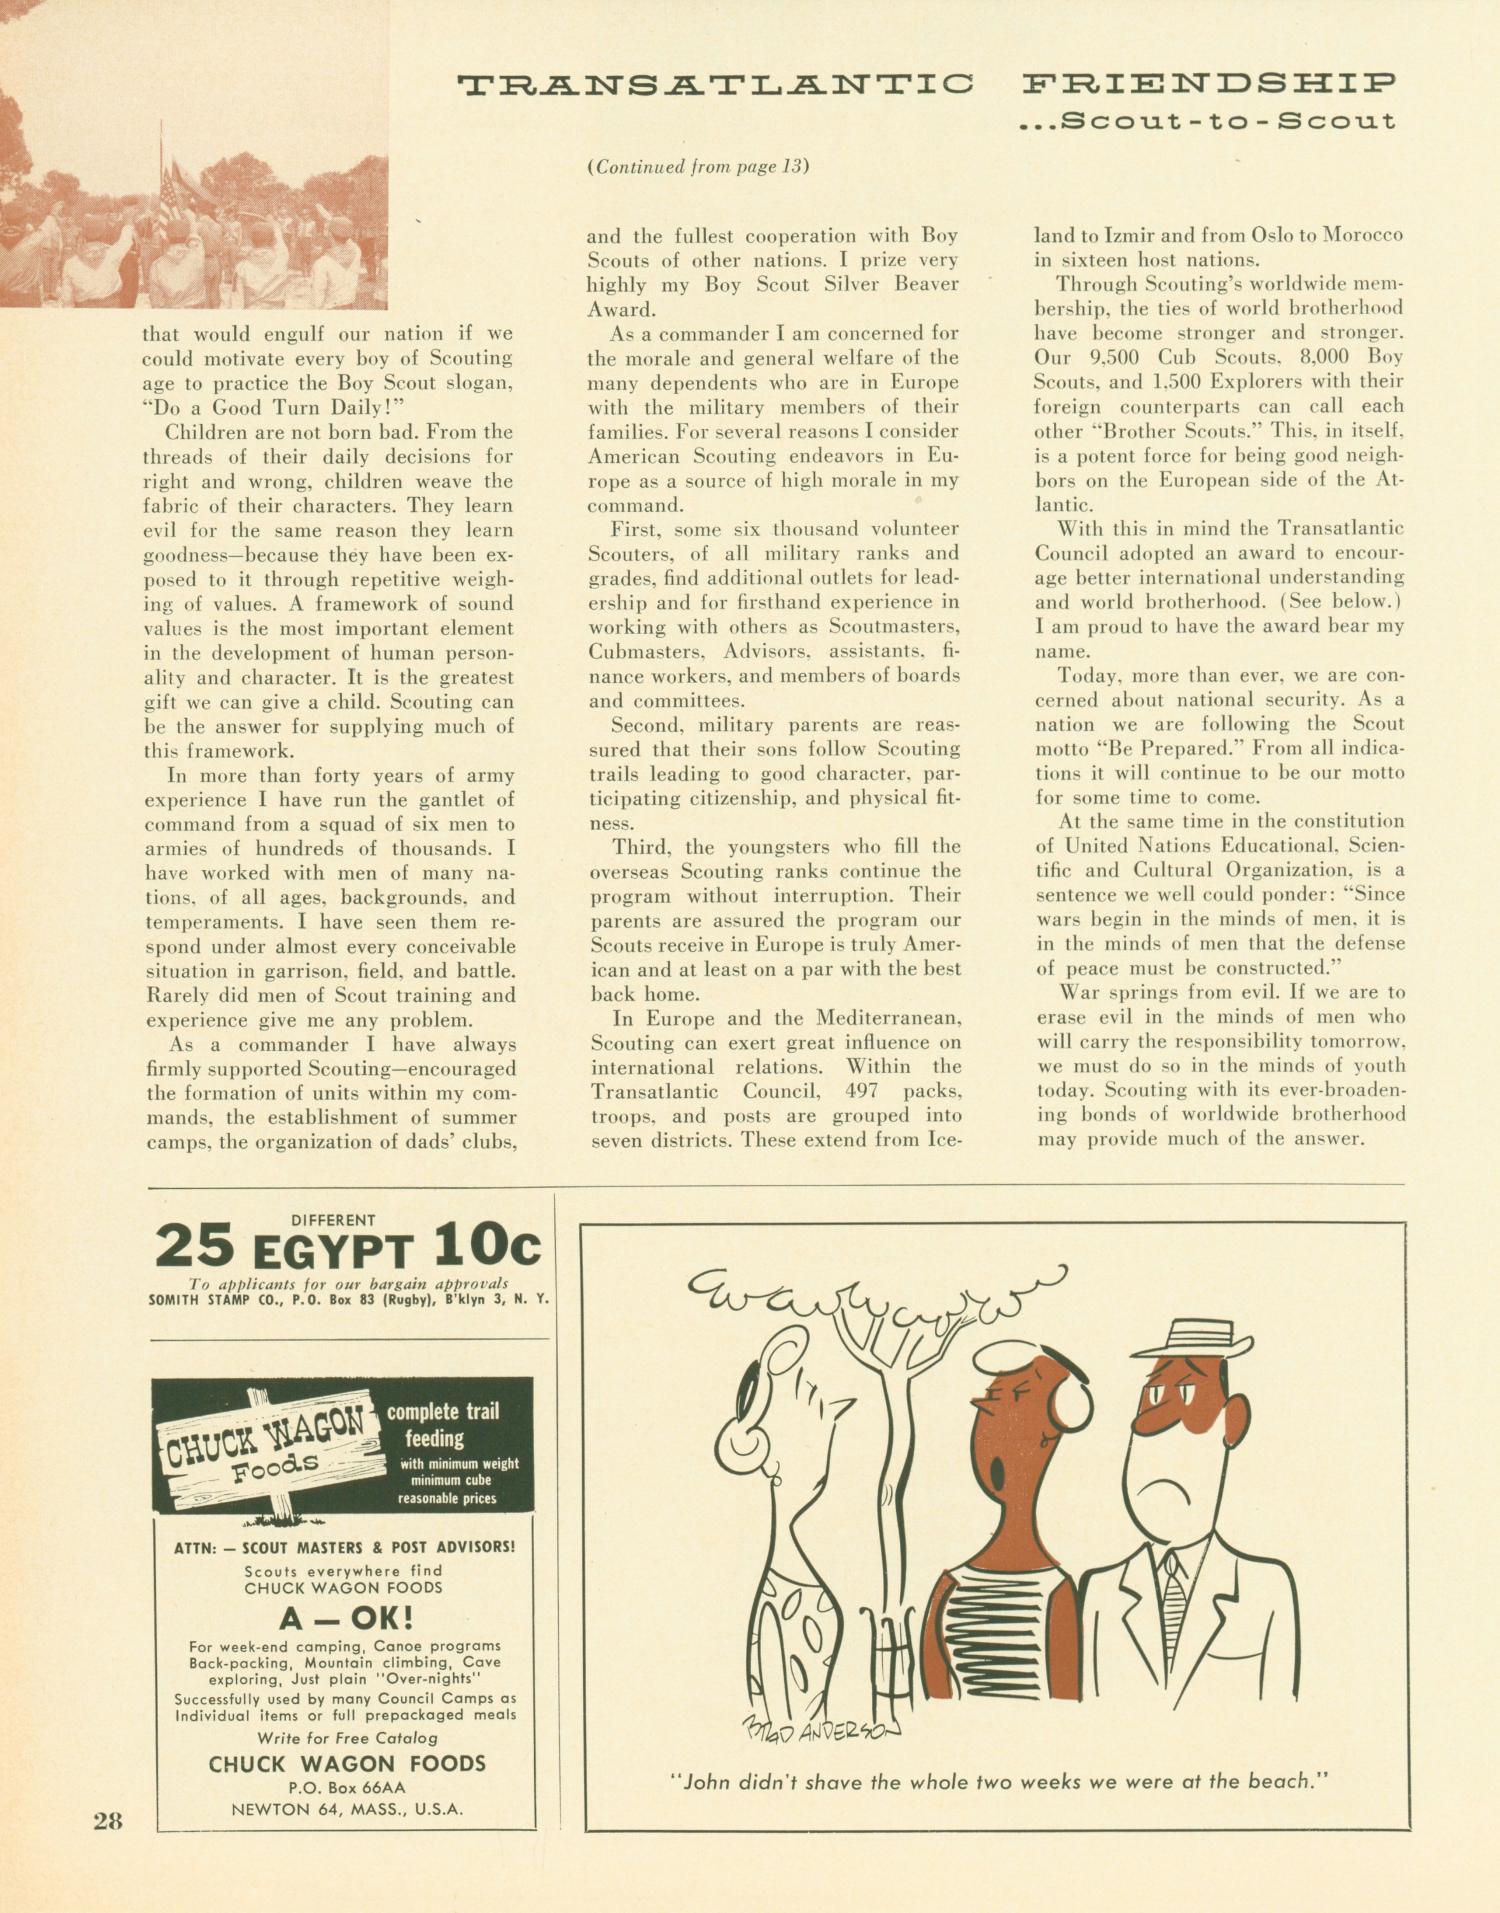 Scouting, Volume 50, Number 5, May-June 1962
                                                
                                                    28
                                                